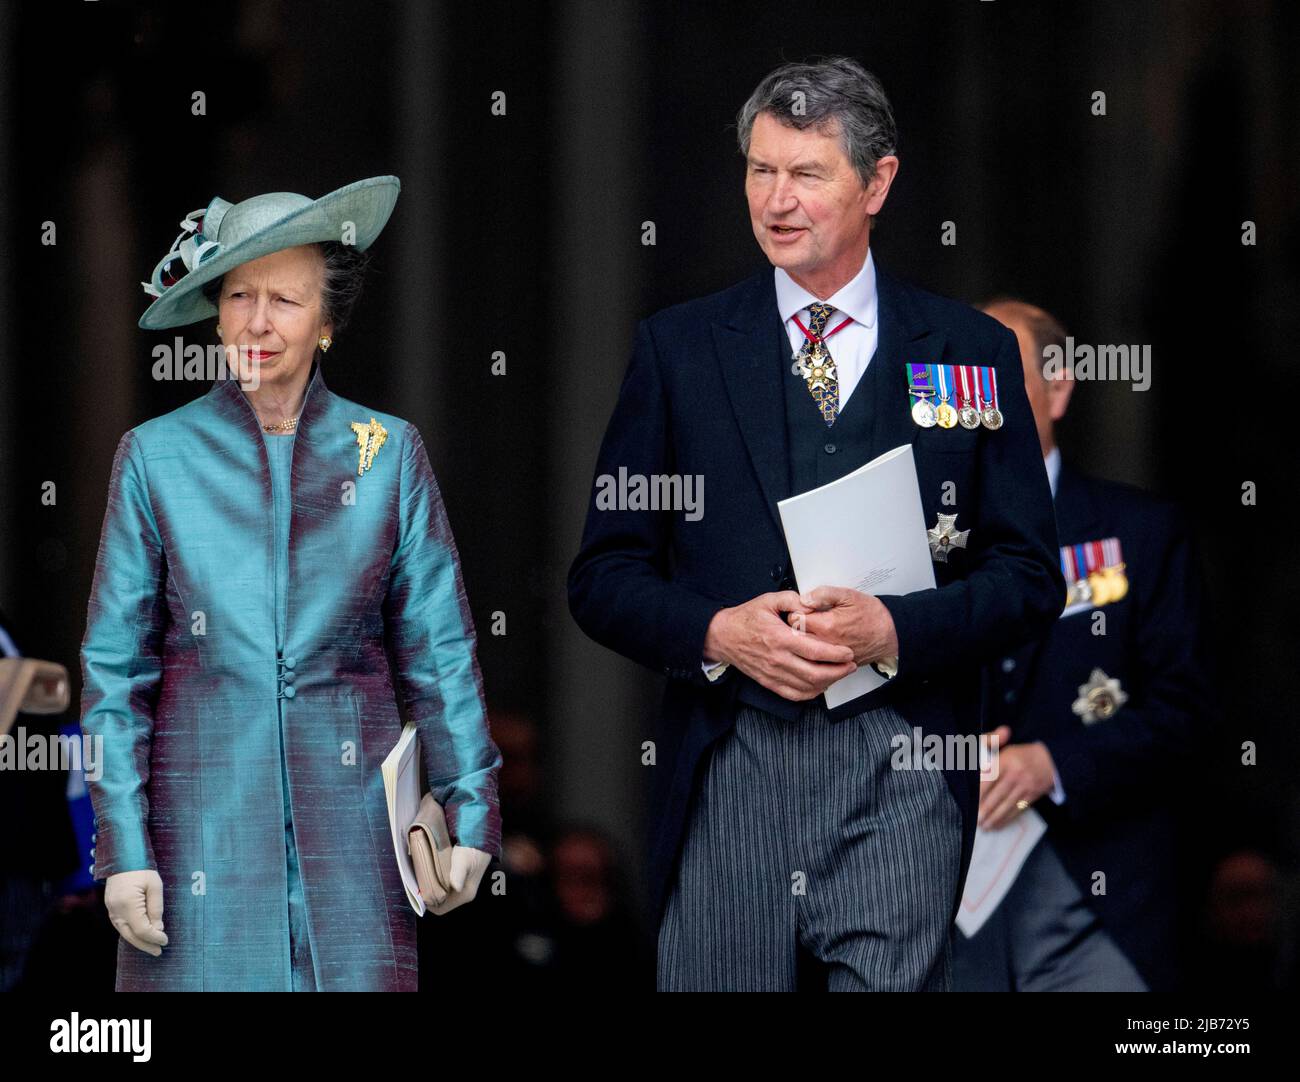 Princess Anne and Sir Timothy Laurence leave at the St Pauls Cathedral in London, on June 03, 2022, after attended the Service for The National Service of Thanksgiving to Celebrate the Platinum Jubilee of Her Majesty The Queen Albert Nieboer/Netherlands OUT/Point de Vue OUT Stock Photo